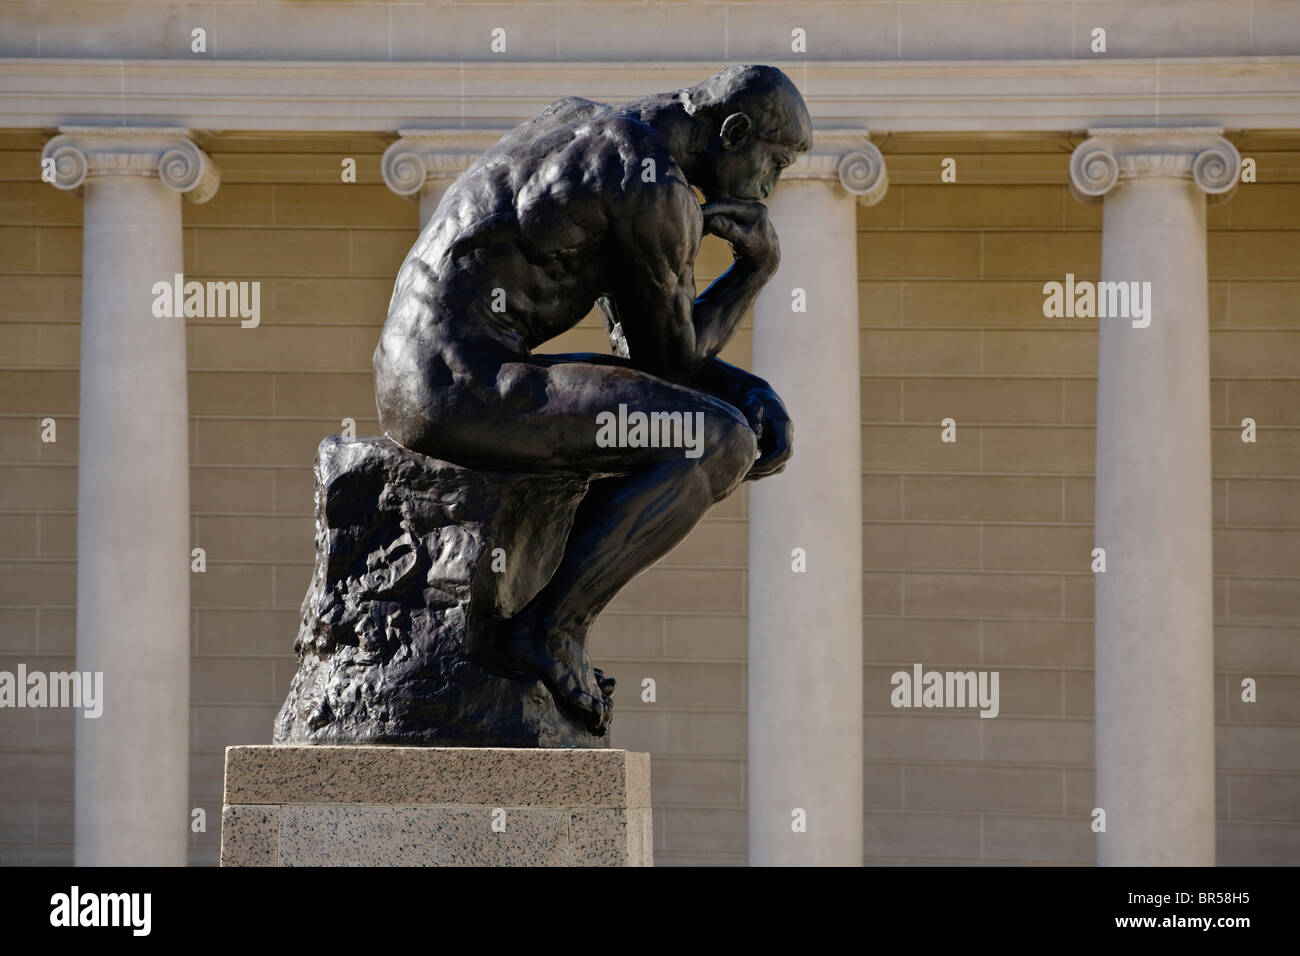 The courtyard of the LEGION OF HONOR with an Auguste Rodin sculpture titled THE THINKER - SAN FRANCISCO, CALIFORNIA Stock Photo